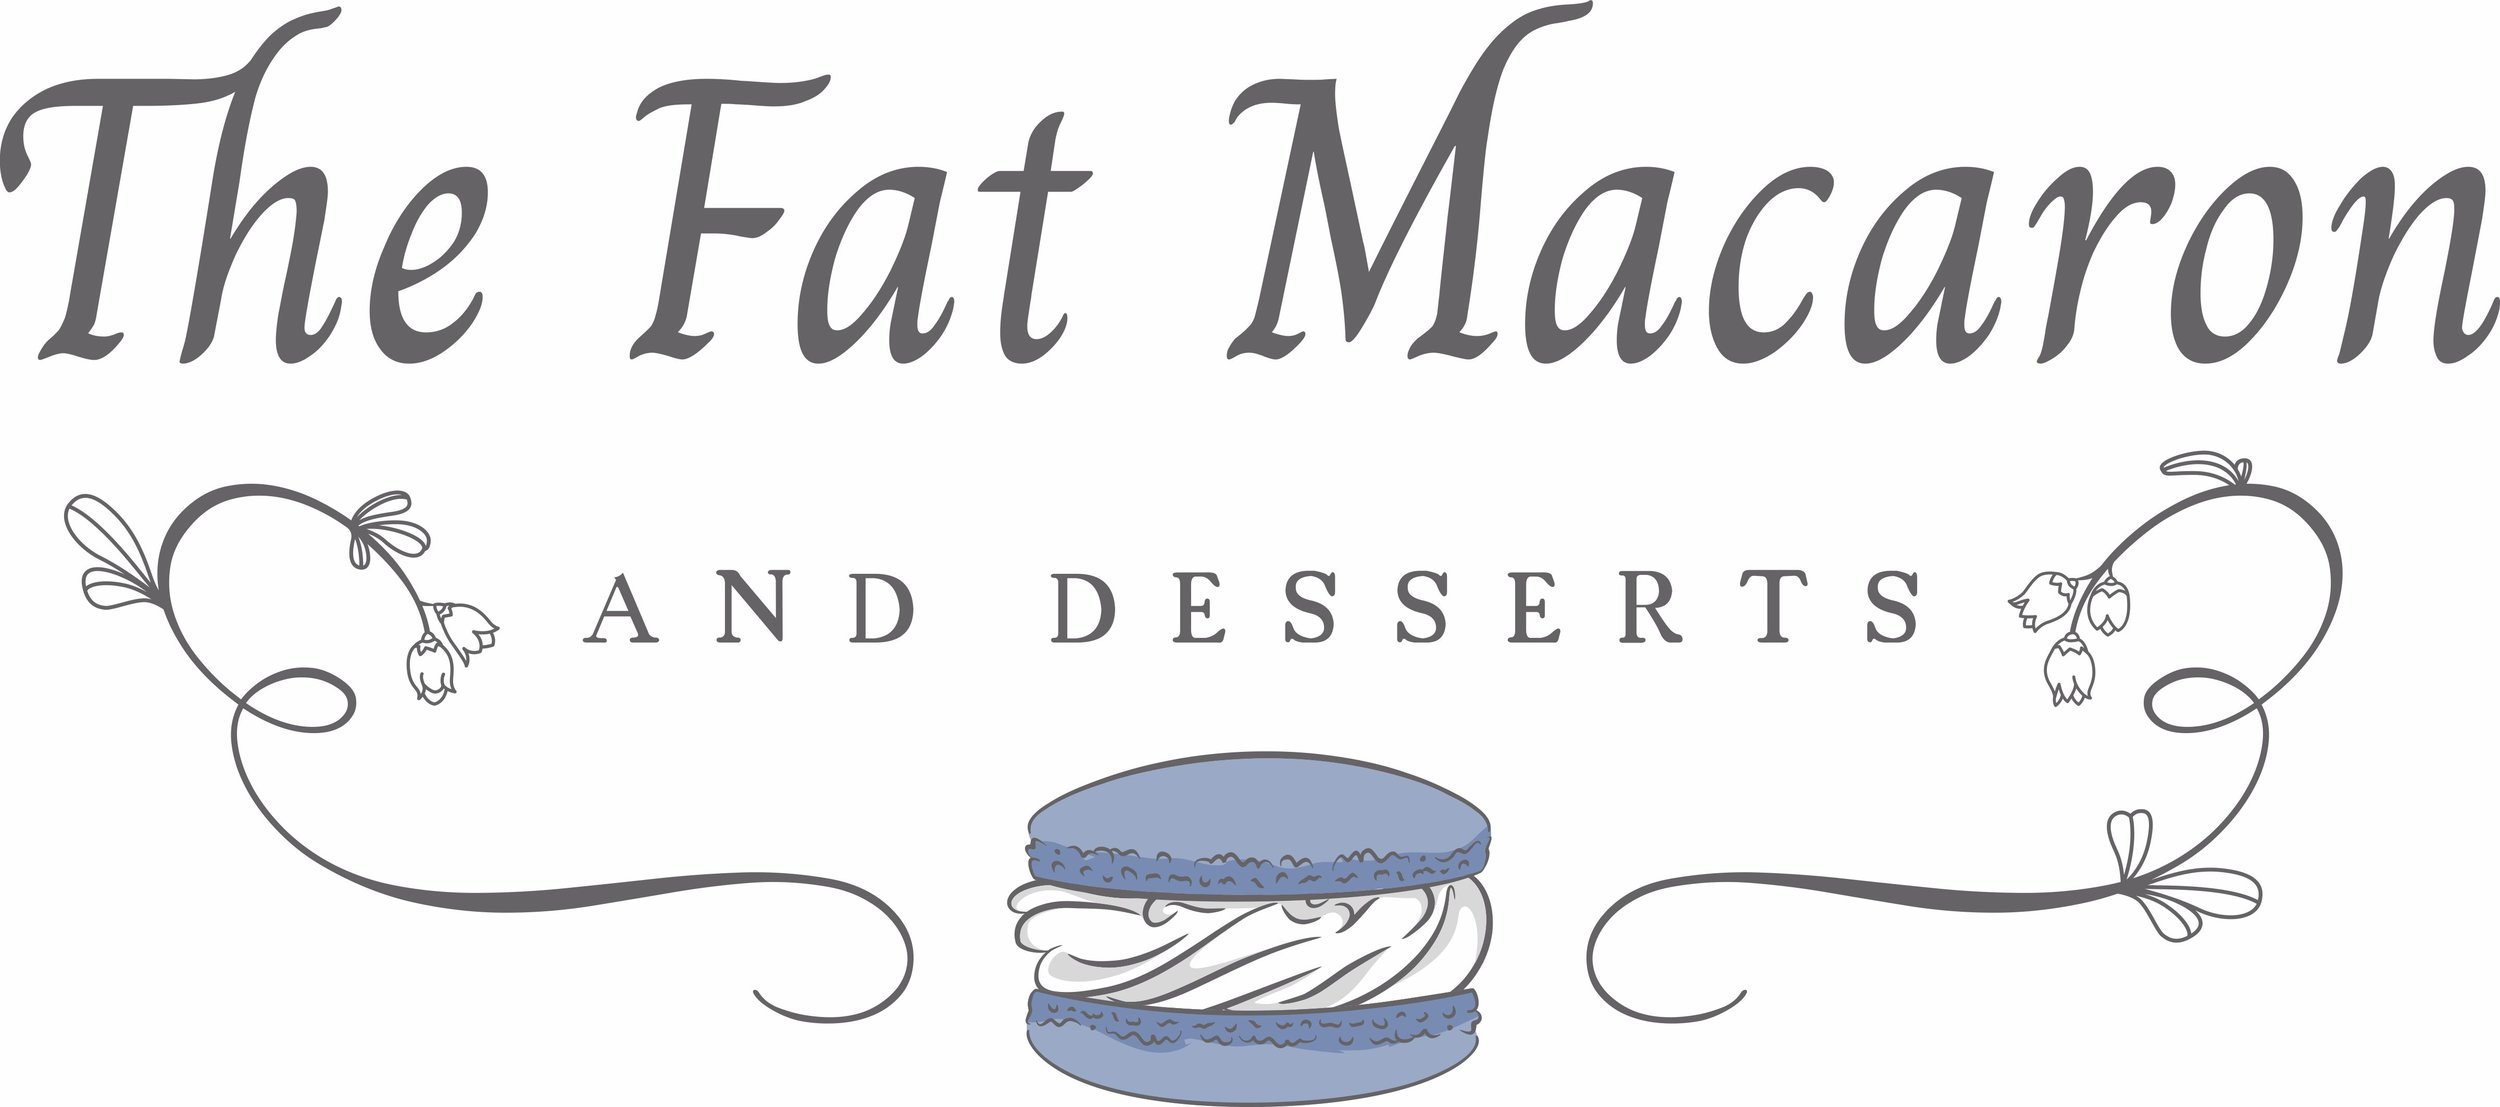 The Fat Macaron and Desserts